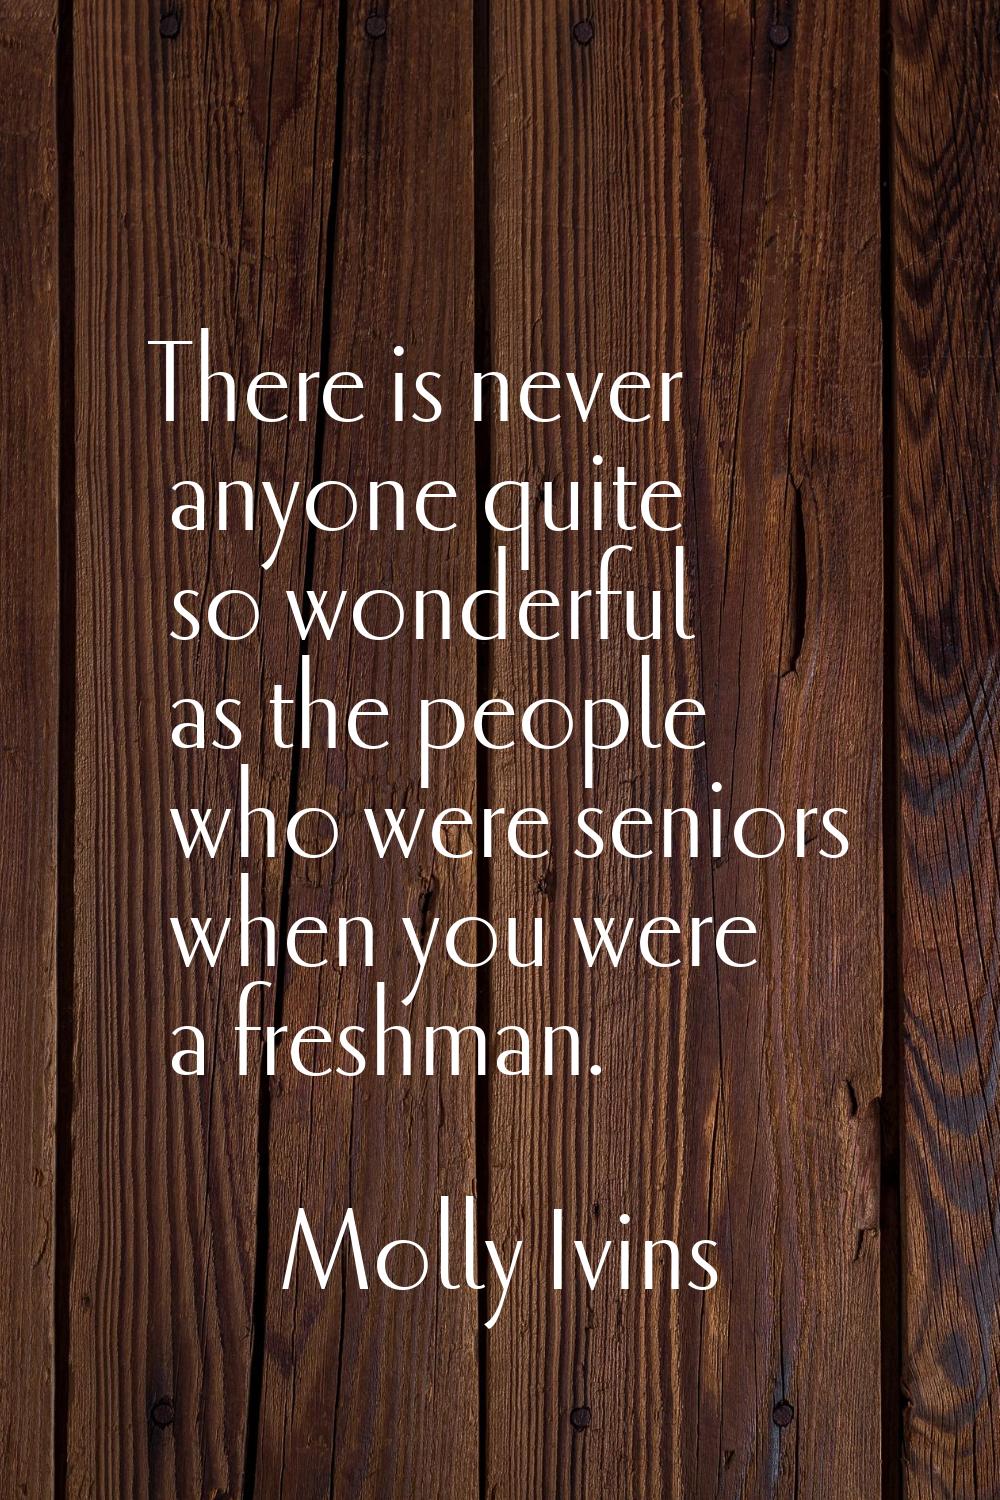 There is never anyone quite so wonderful as the people who were seniors when you were a freshman.